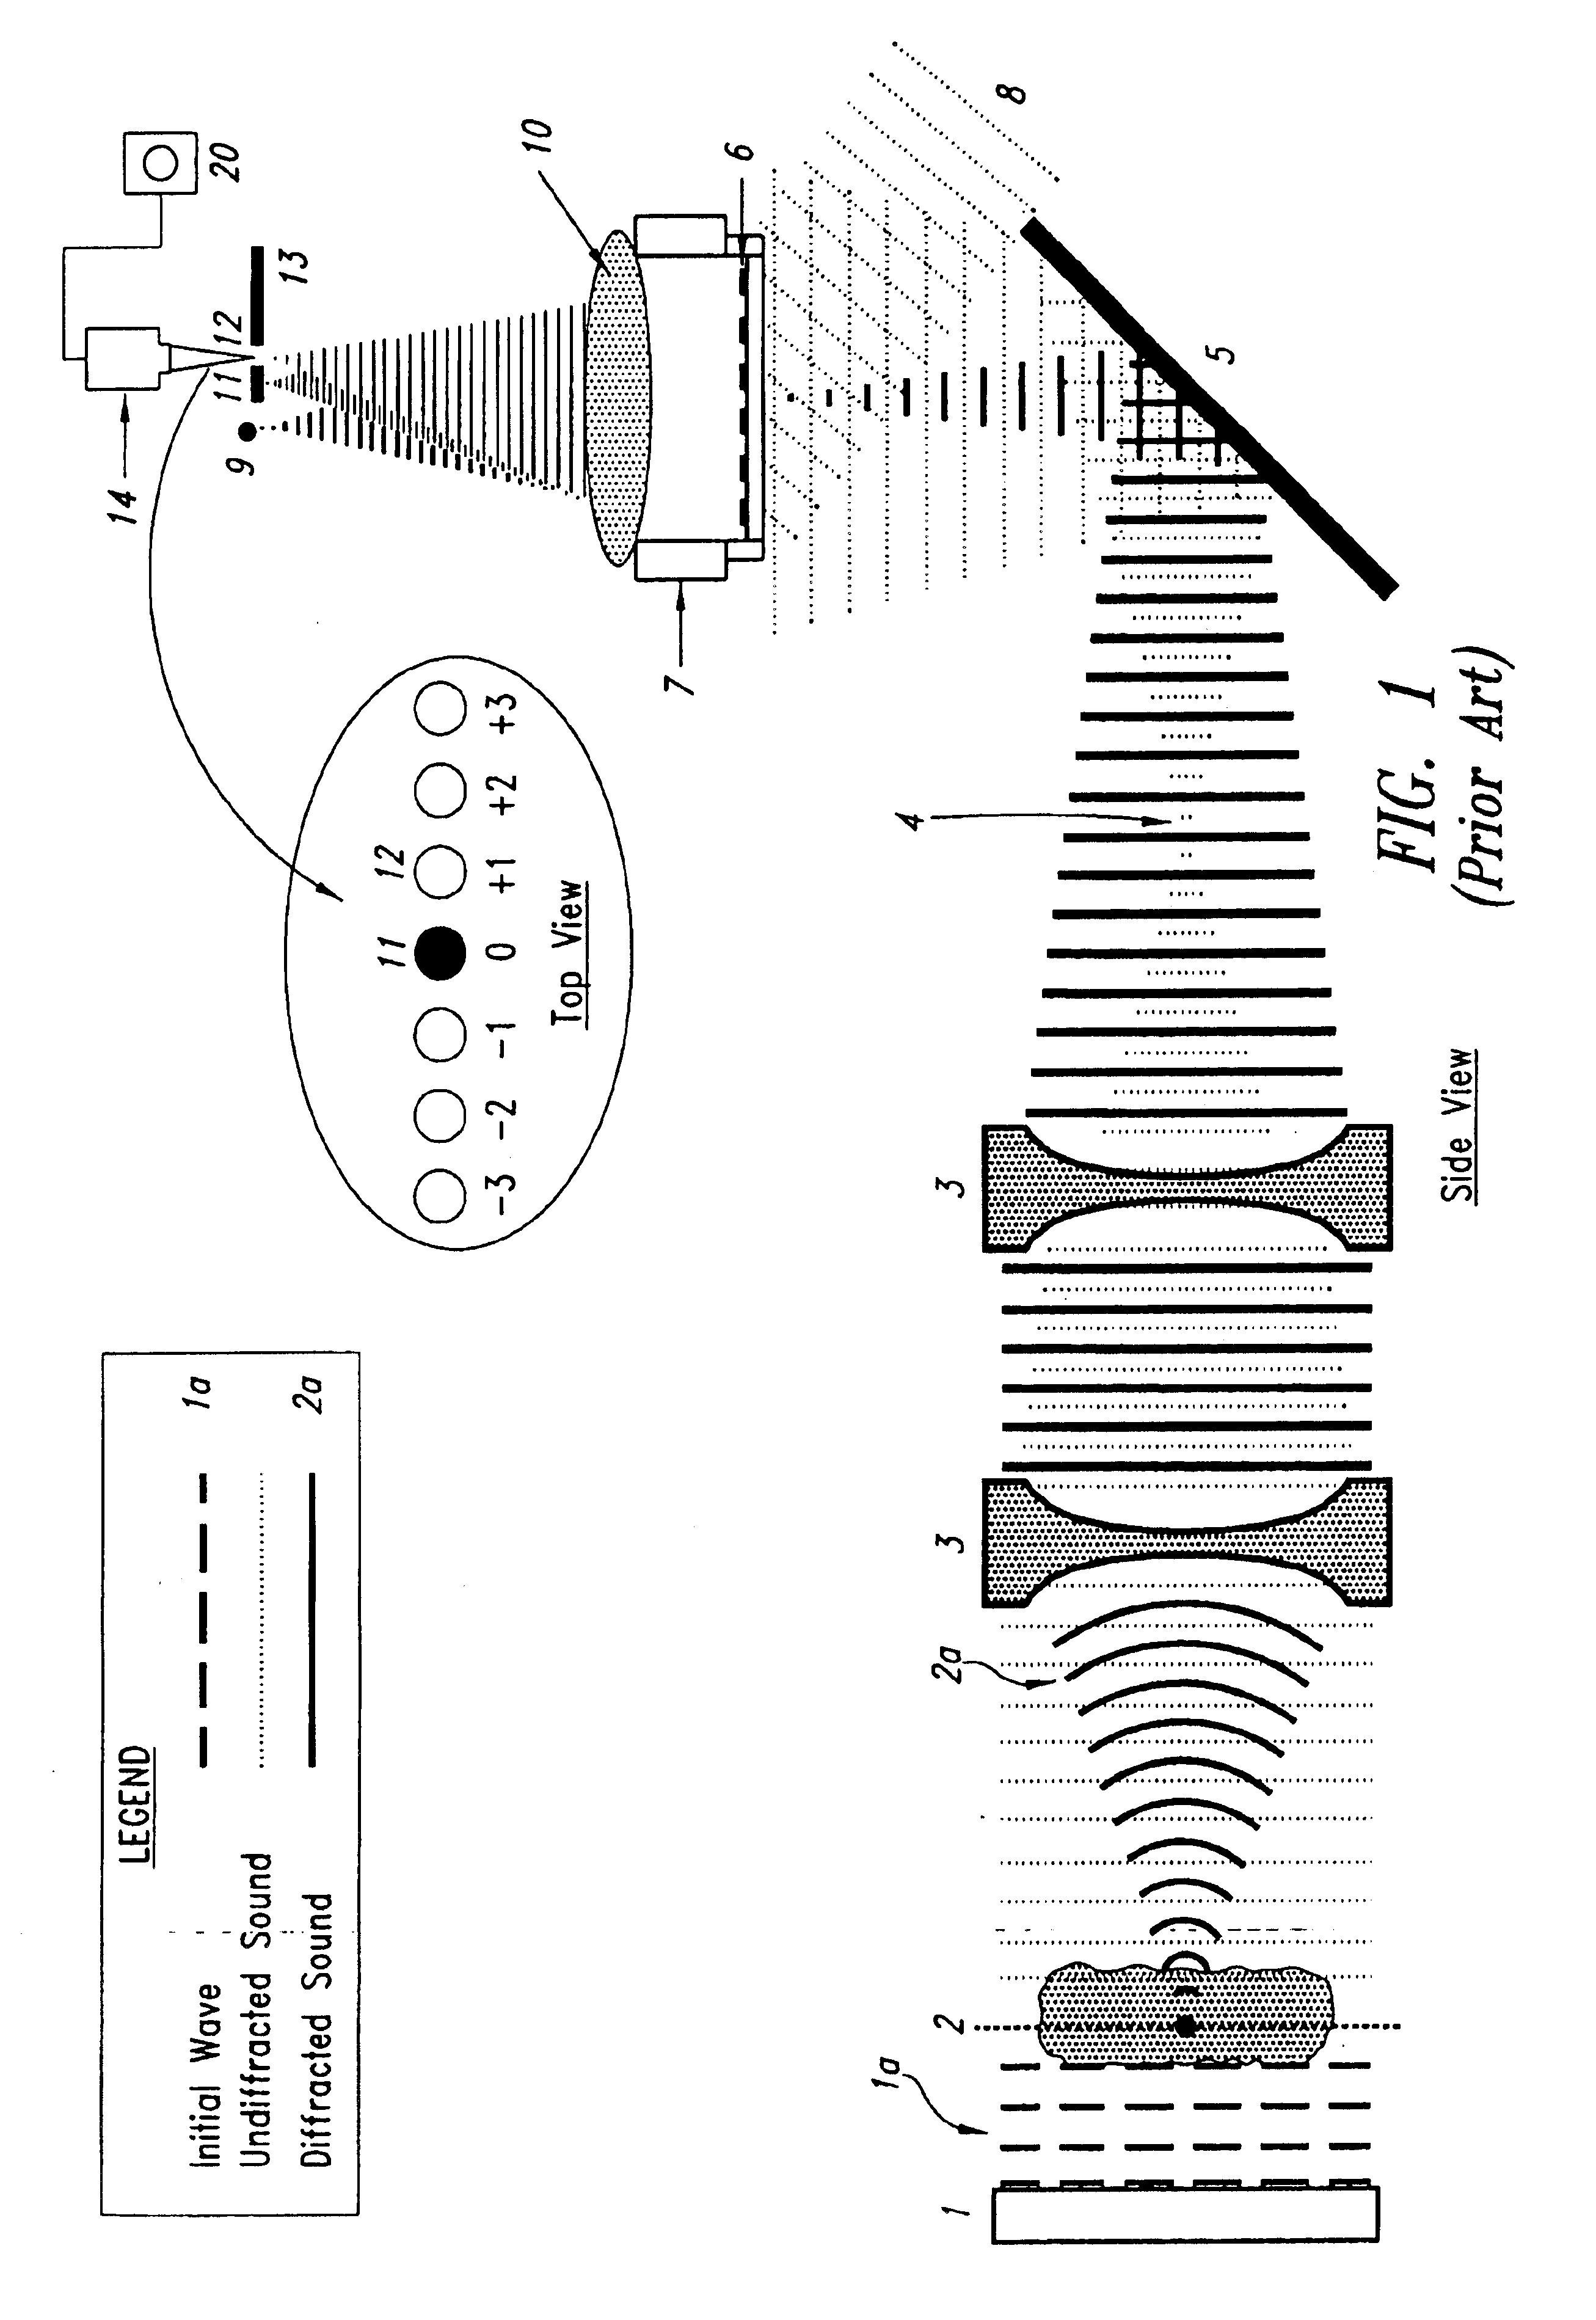 System and method for tissue biopsy using ultrasonic imaging